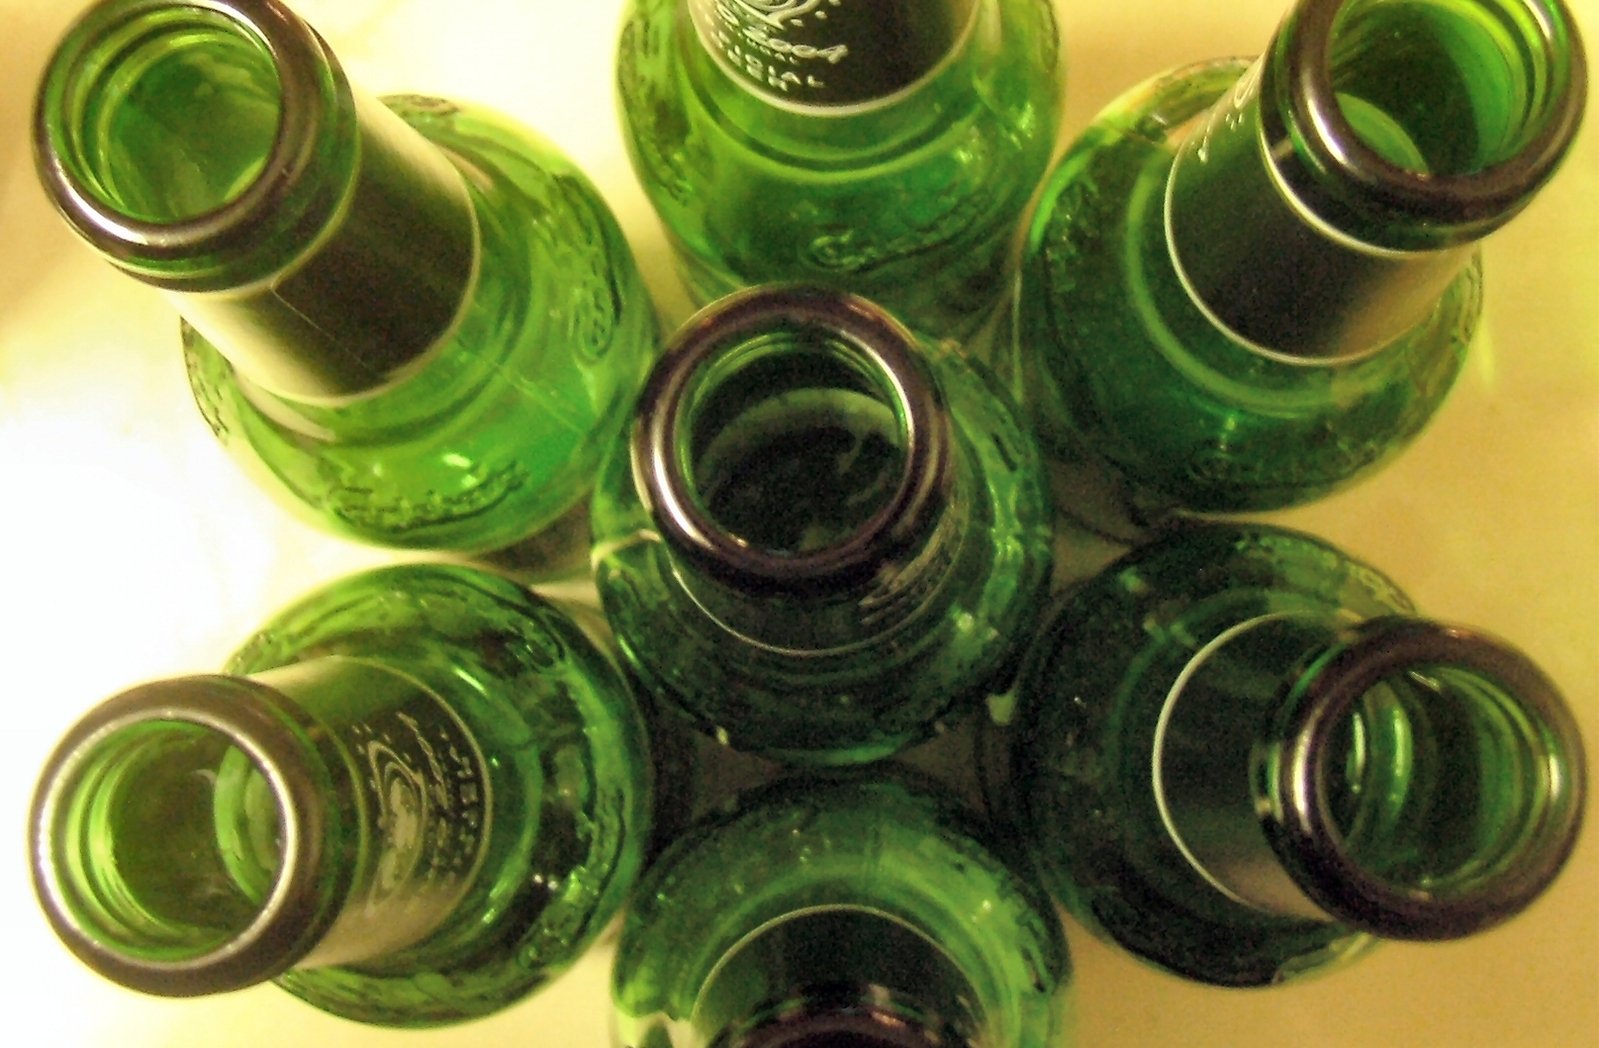 a large bunch of green bottles stacked together